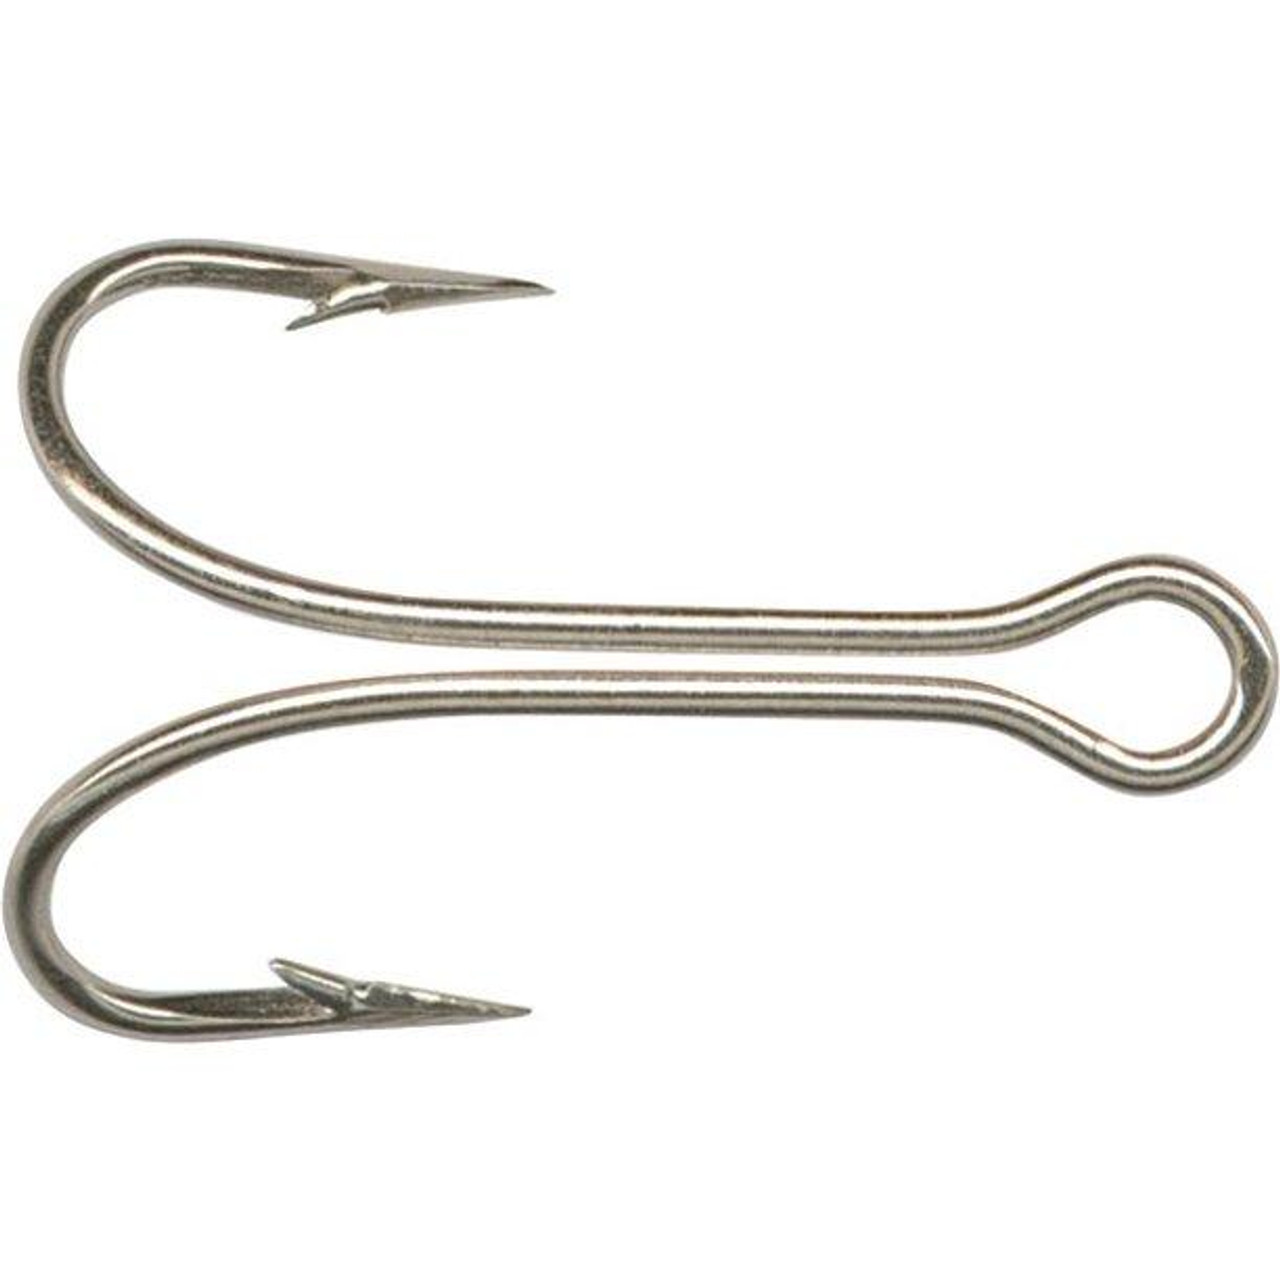 https://cdn11.bigcommerce.com/s-i6ykqoitnd/images/stencil/1280x1280/products/10524/52052/mustad-double-hook-in-nickle-100-per-pack-fishing-hooks-mustad-238796__80892.1639601031.jpg?c=1&imbypass=on